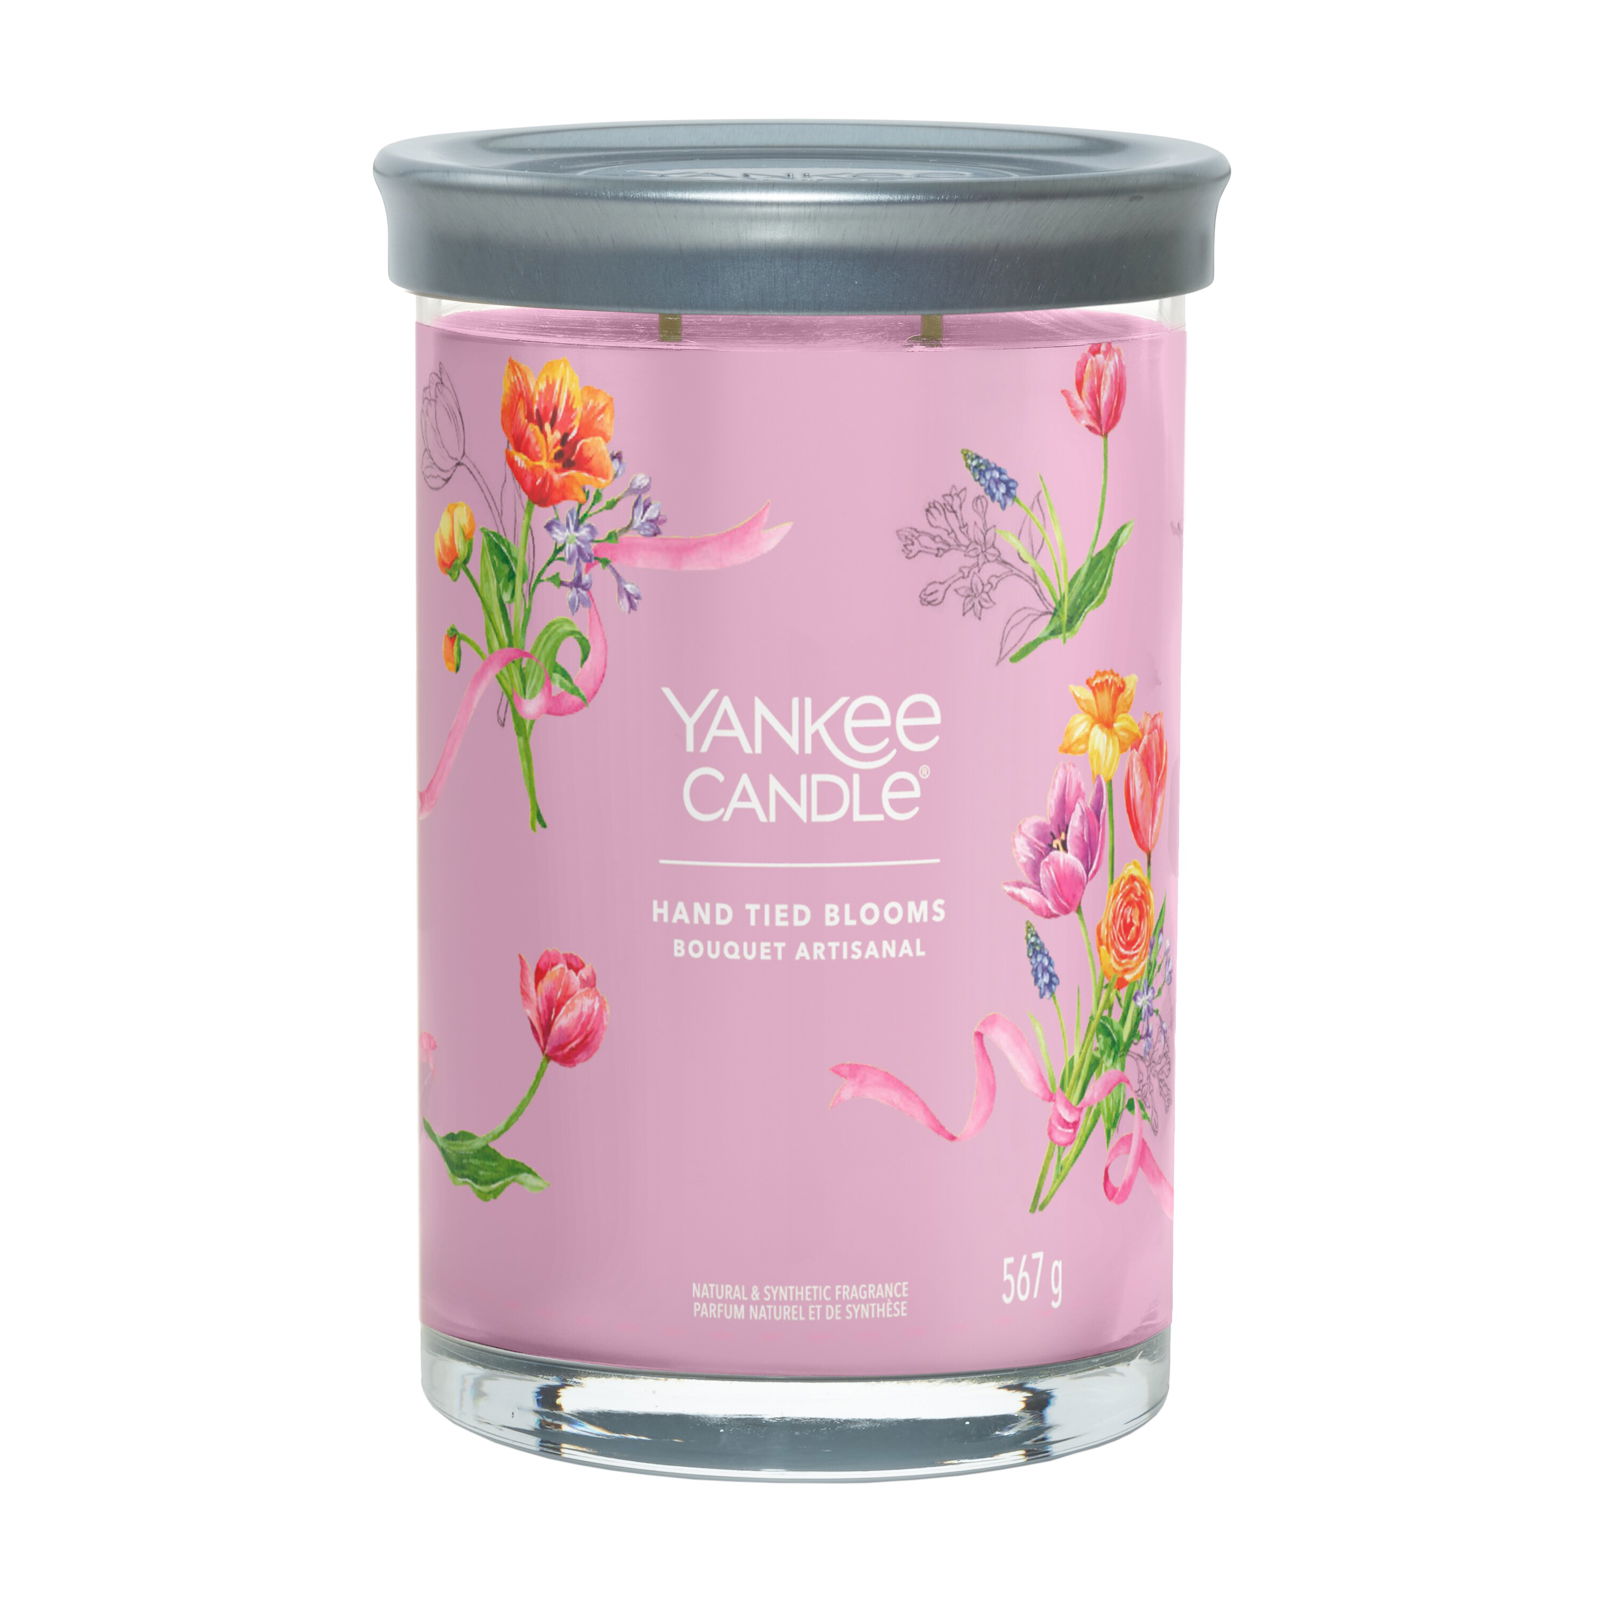 Hand Tied Blooms Signature Large Tumbler 567g 2-Docht